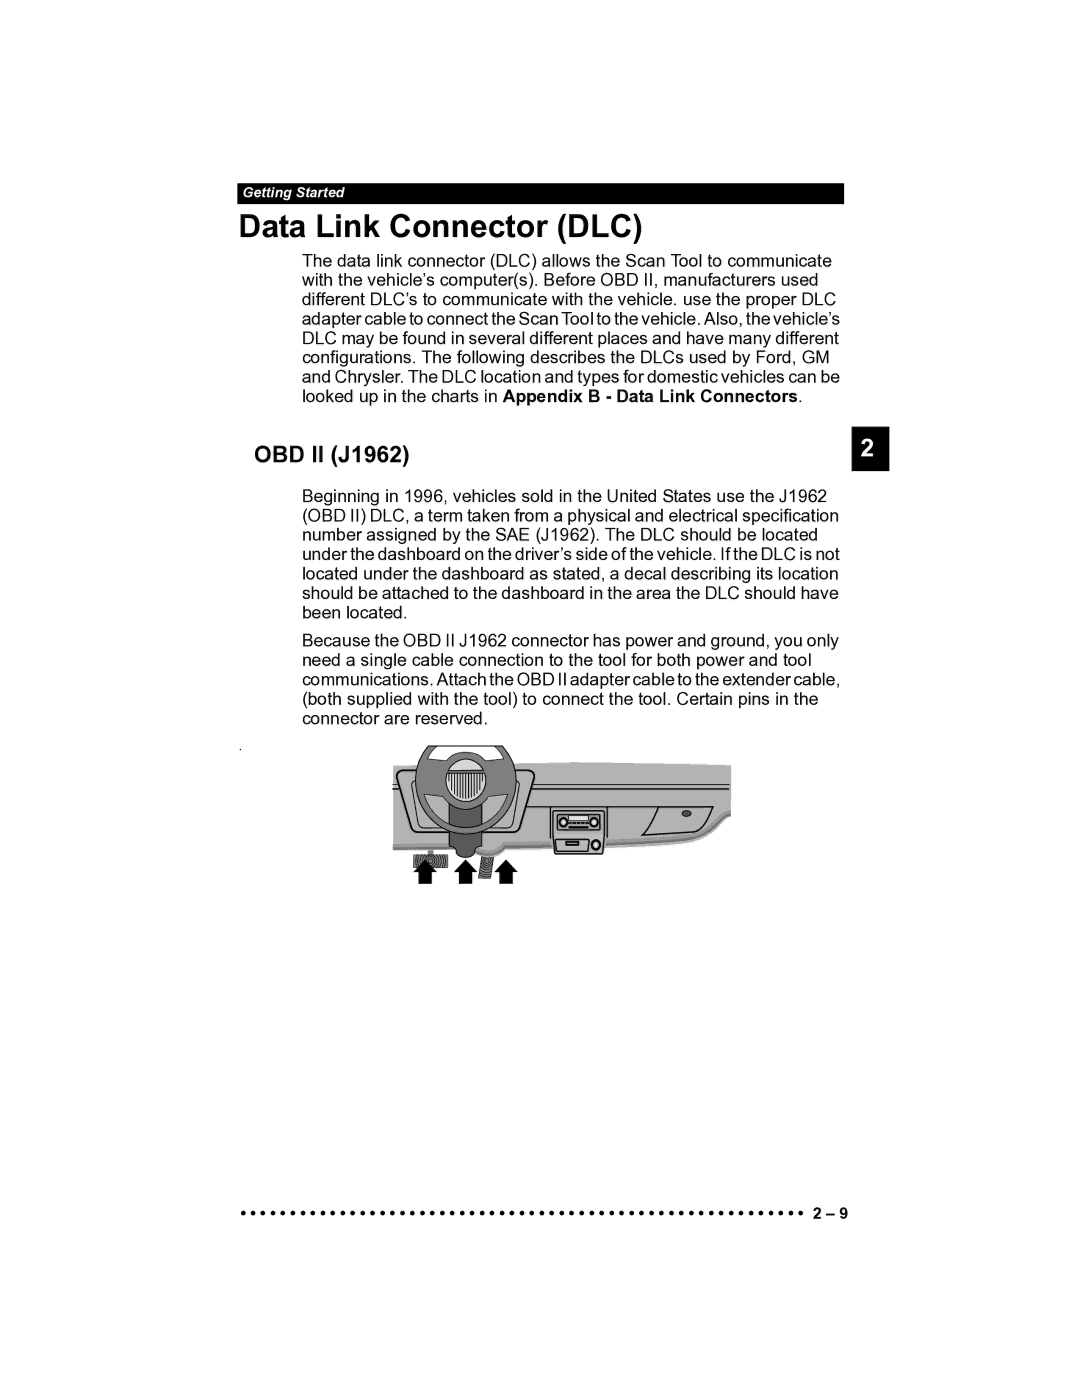 Actron CP9185 manual Data Link Connector DLC, OBD II J1962 